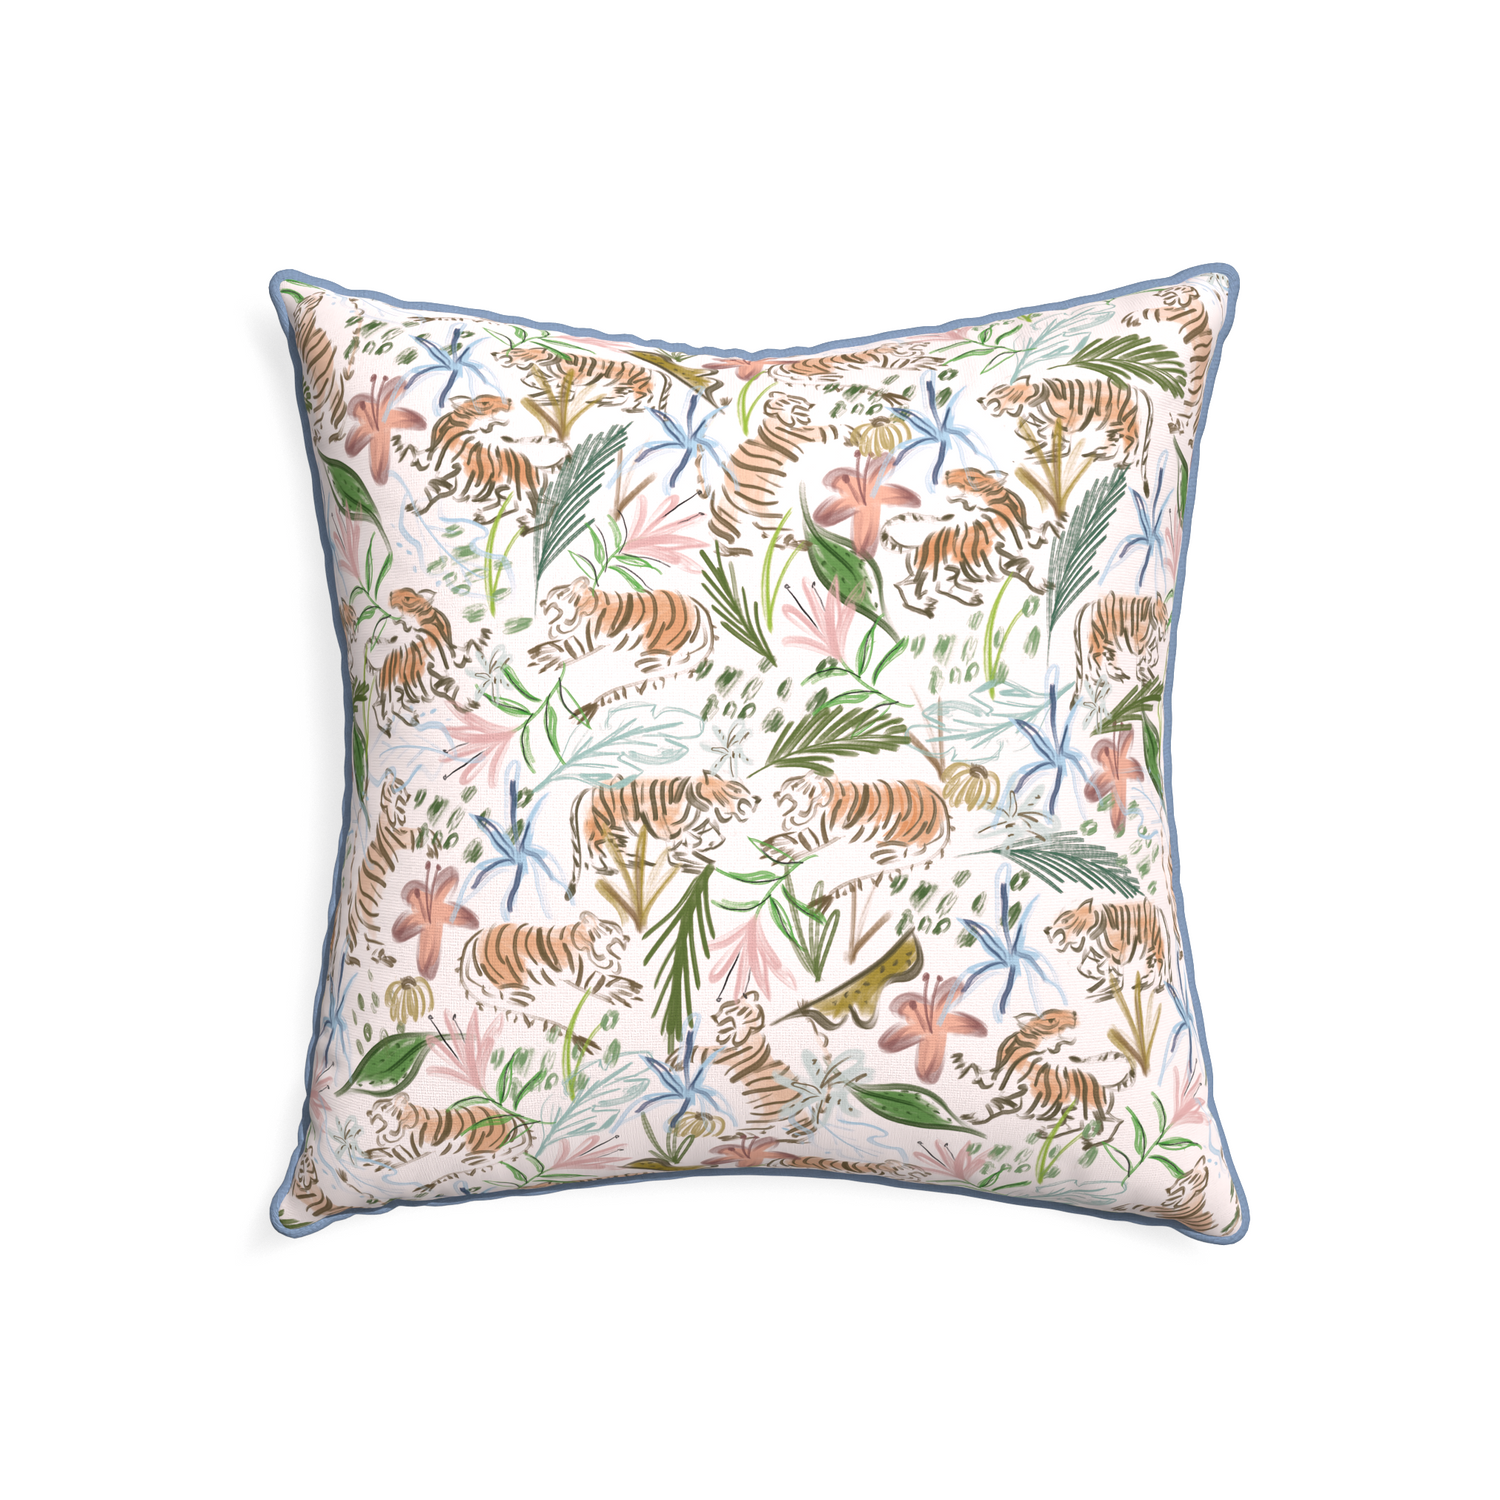 22-square frida pink custom pink chinoiserie tigerpillow with sky piping on white background